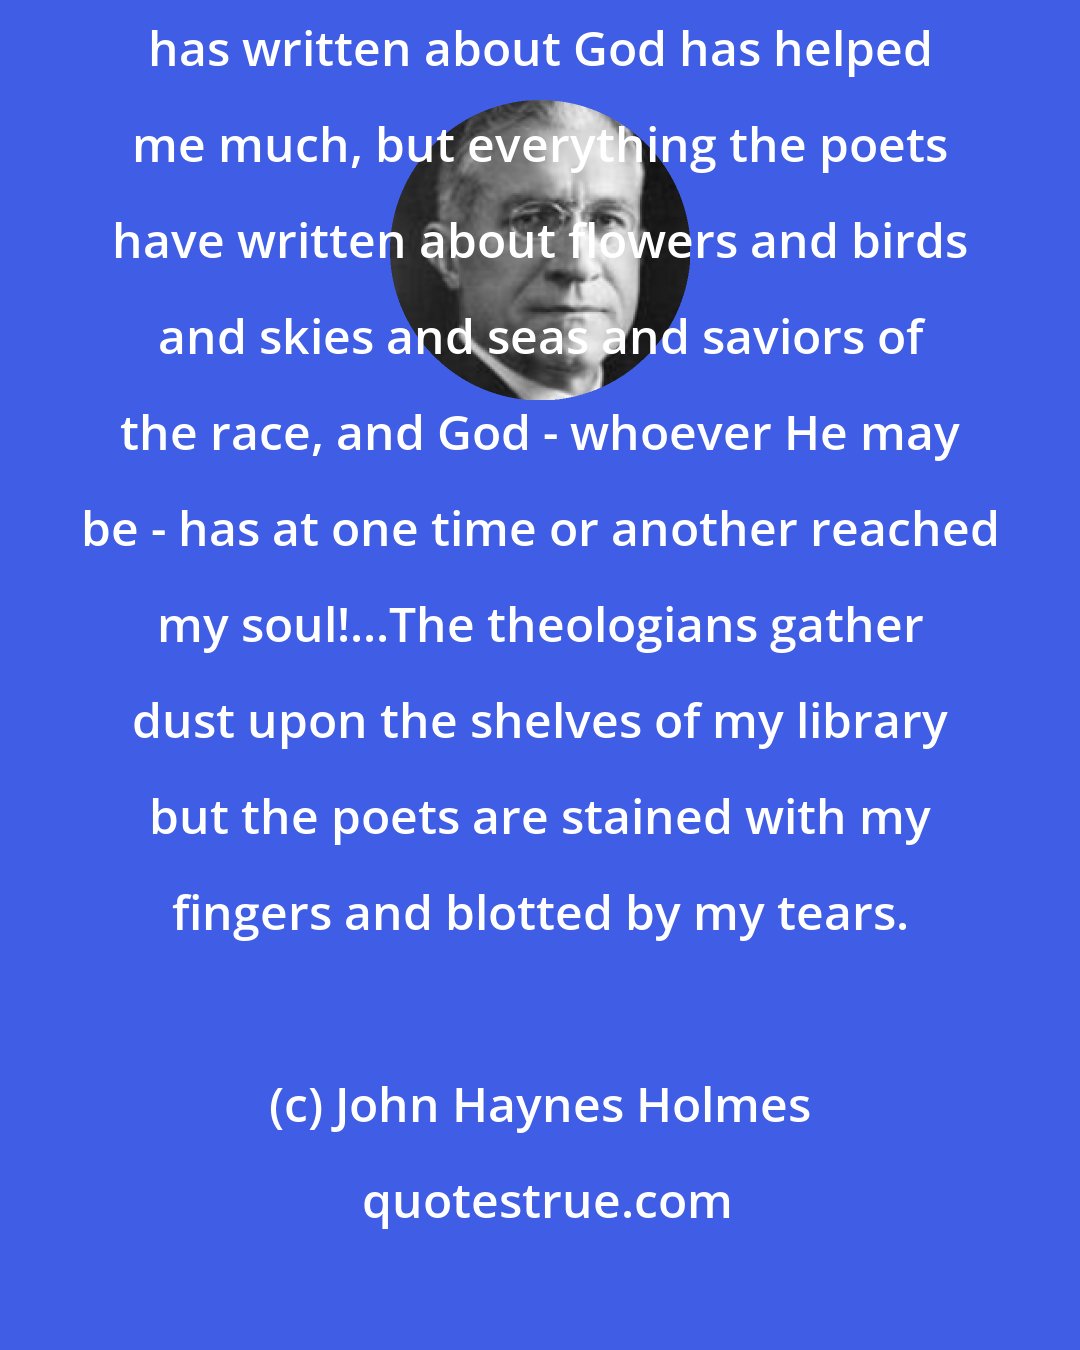 John Haynes Holmes: When I say God it is poetry and not theology. Nothing that any theologian has written about God has helped me much, but everything the poets have written about flowers and birds and skies and seas and saviors of the race, and God - whoever He may be - has at one time or another reached my soul!...The theologians gather dust upon the shelves of my library but the poets are stained with my fingers and blotted by my tears.